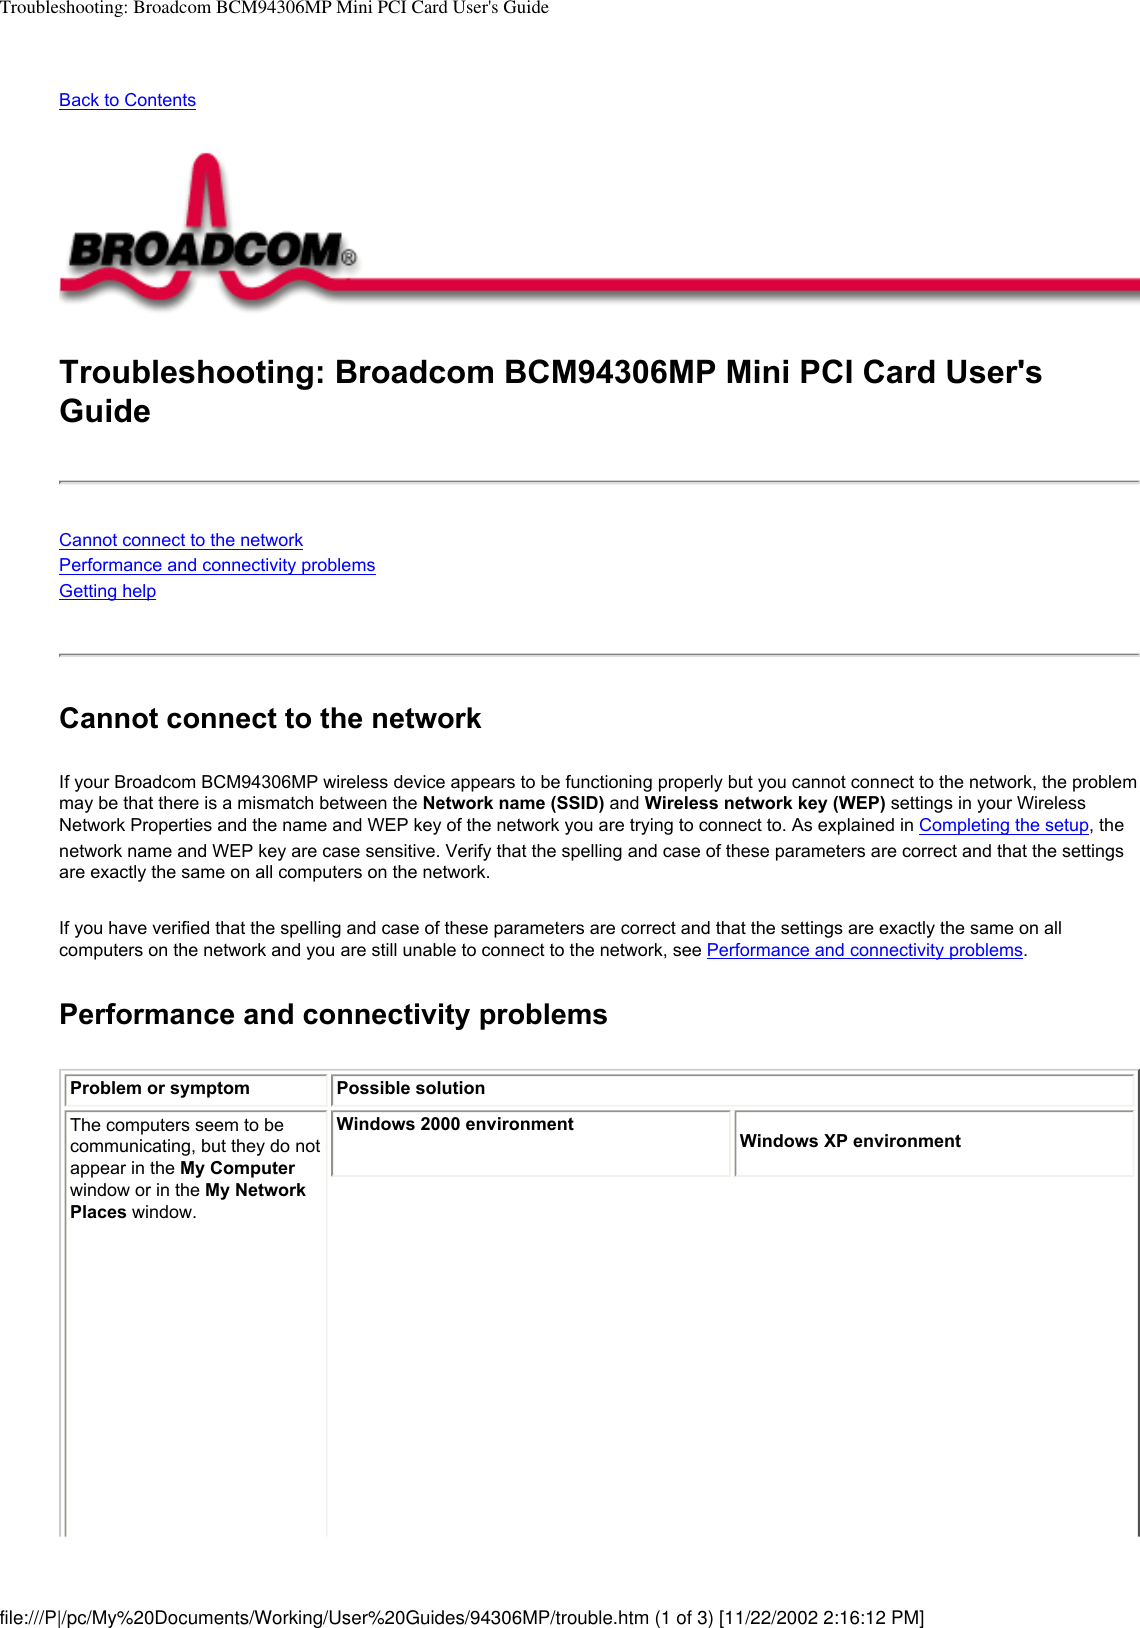 Troubleshooting: Broadcom BCM94306MP Mini PCI Card User&apos;s GuideBack to Contents Troubleshooting: Broadcom BCM94306MP Mini PCI Card User&apos;s GuideCannot connect to the networkPerformance and connectivity problemsGetting helpCannot connect to the networkIf your Broadcom BCM94306MP wireless device appears to be functioning properly but you cannot connect to the network, the problem may be that there is a mismatch between the Network name (SSID) and Wireless network key (WEP) settings in your Wireless Network Properties and the name and WEP key of the network you are trying to connect to. As explained in Completing the setup, the network name and WEP key are case sensitive. Verify that the spelling and case of these parameters are correct and that the settings are exactly the same on all computers on the network.If you have verified that the spelling and case of these parameters are correct and that the settings are exactly the same on all computers on the network and you are still unable to connect to the network, see Performance and connectivity problems. Performance and connectivity problemsProblem or symptom Possible solutionThe computers seem to be communicating, but they do not appear in the My Computer window or in the My Network Places window.Windows 2000 environmentWindows XP environmentfile:///P|/pc/My%20Documents/Working/User%20Guides/94306MP/trouble.htm (1 of 3) [11/22/2002 2:16:12 PM]